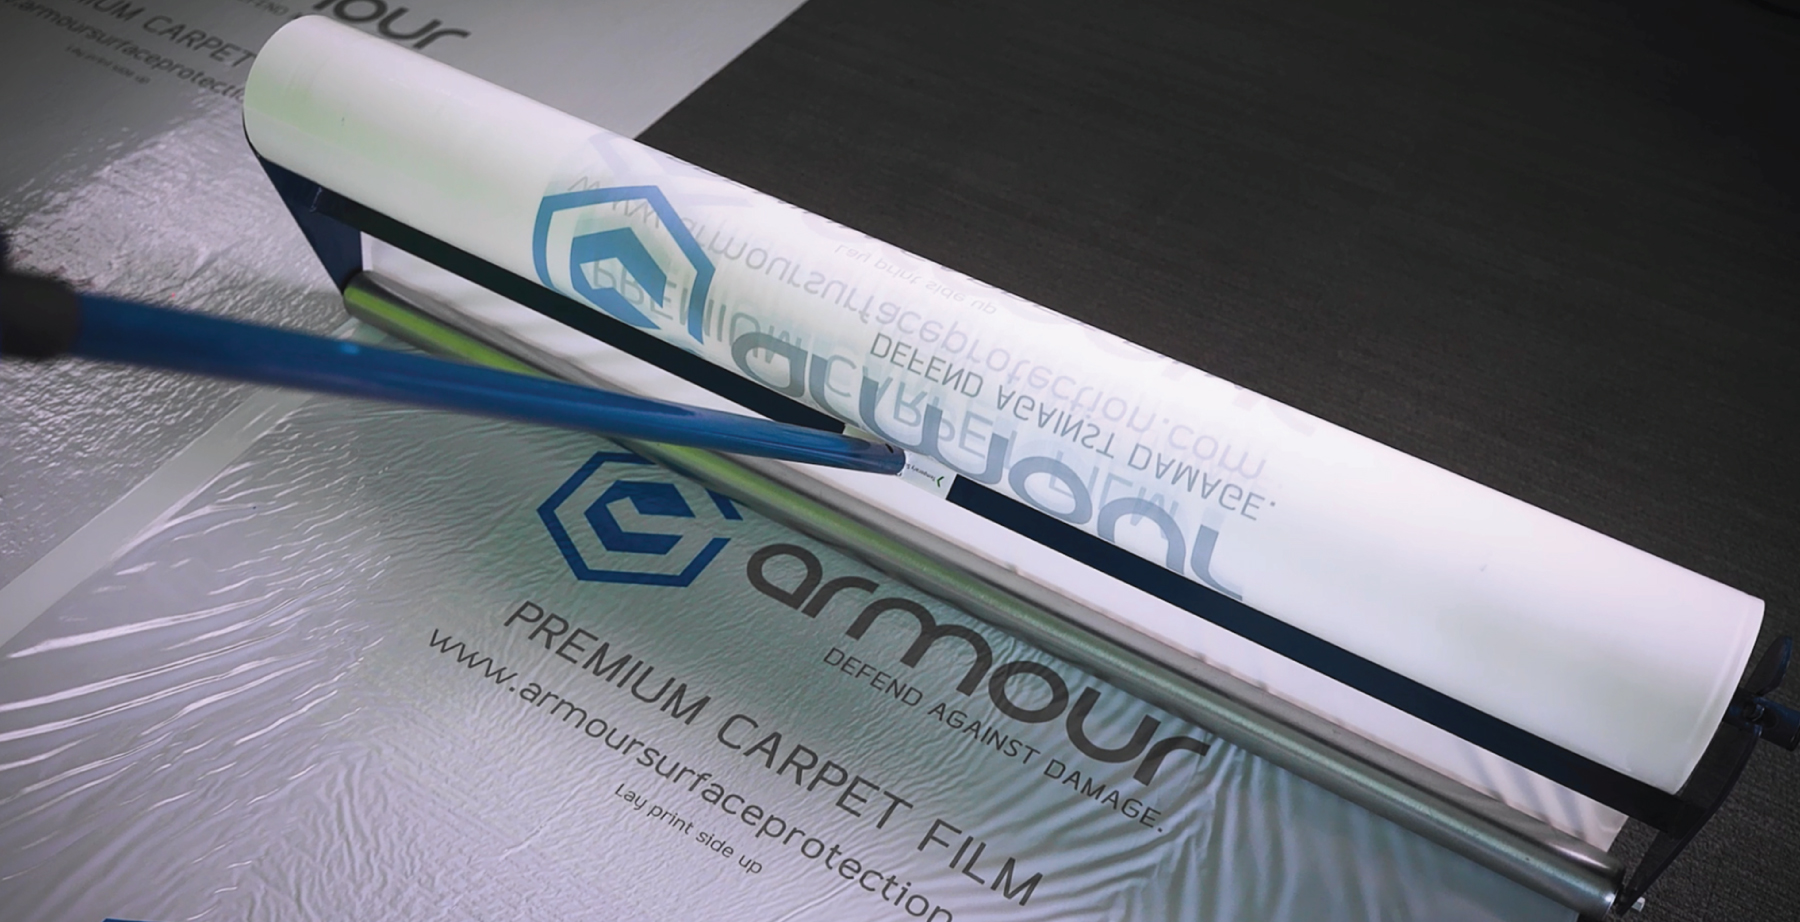 Image of Armour Premium Carpet Film for jobsite carpet protection blog by Axiom, jobsite surface protection supplier to Canada/ North America construction professionals